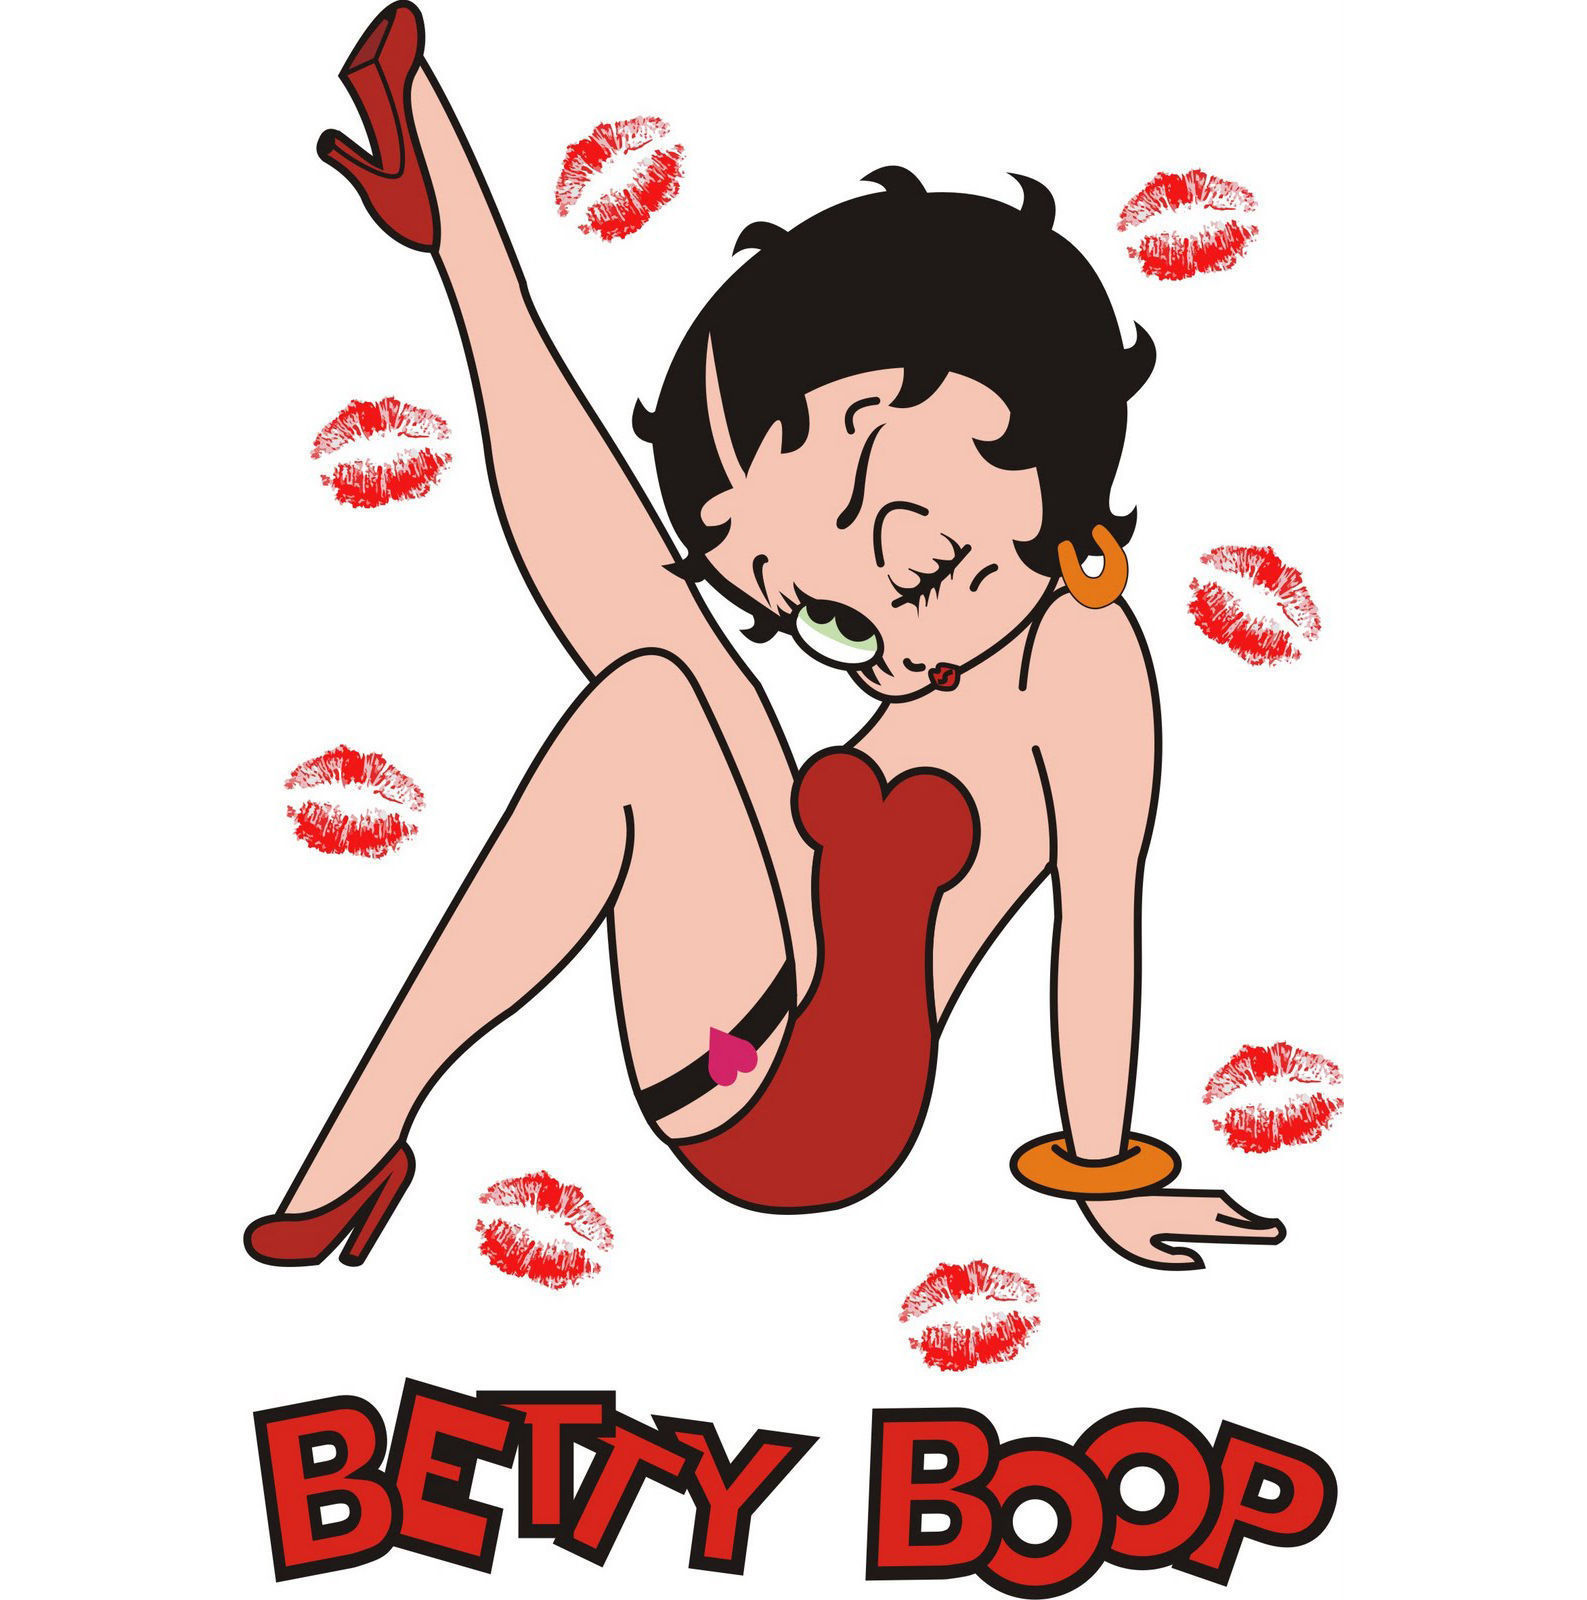 Betty Boop Words Poster 24 x 36 in